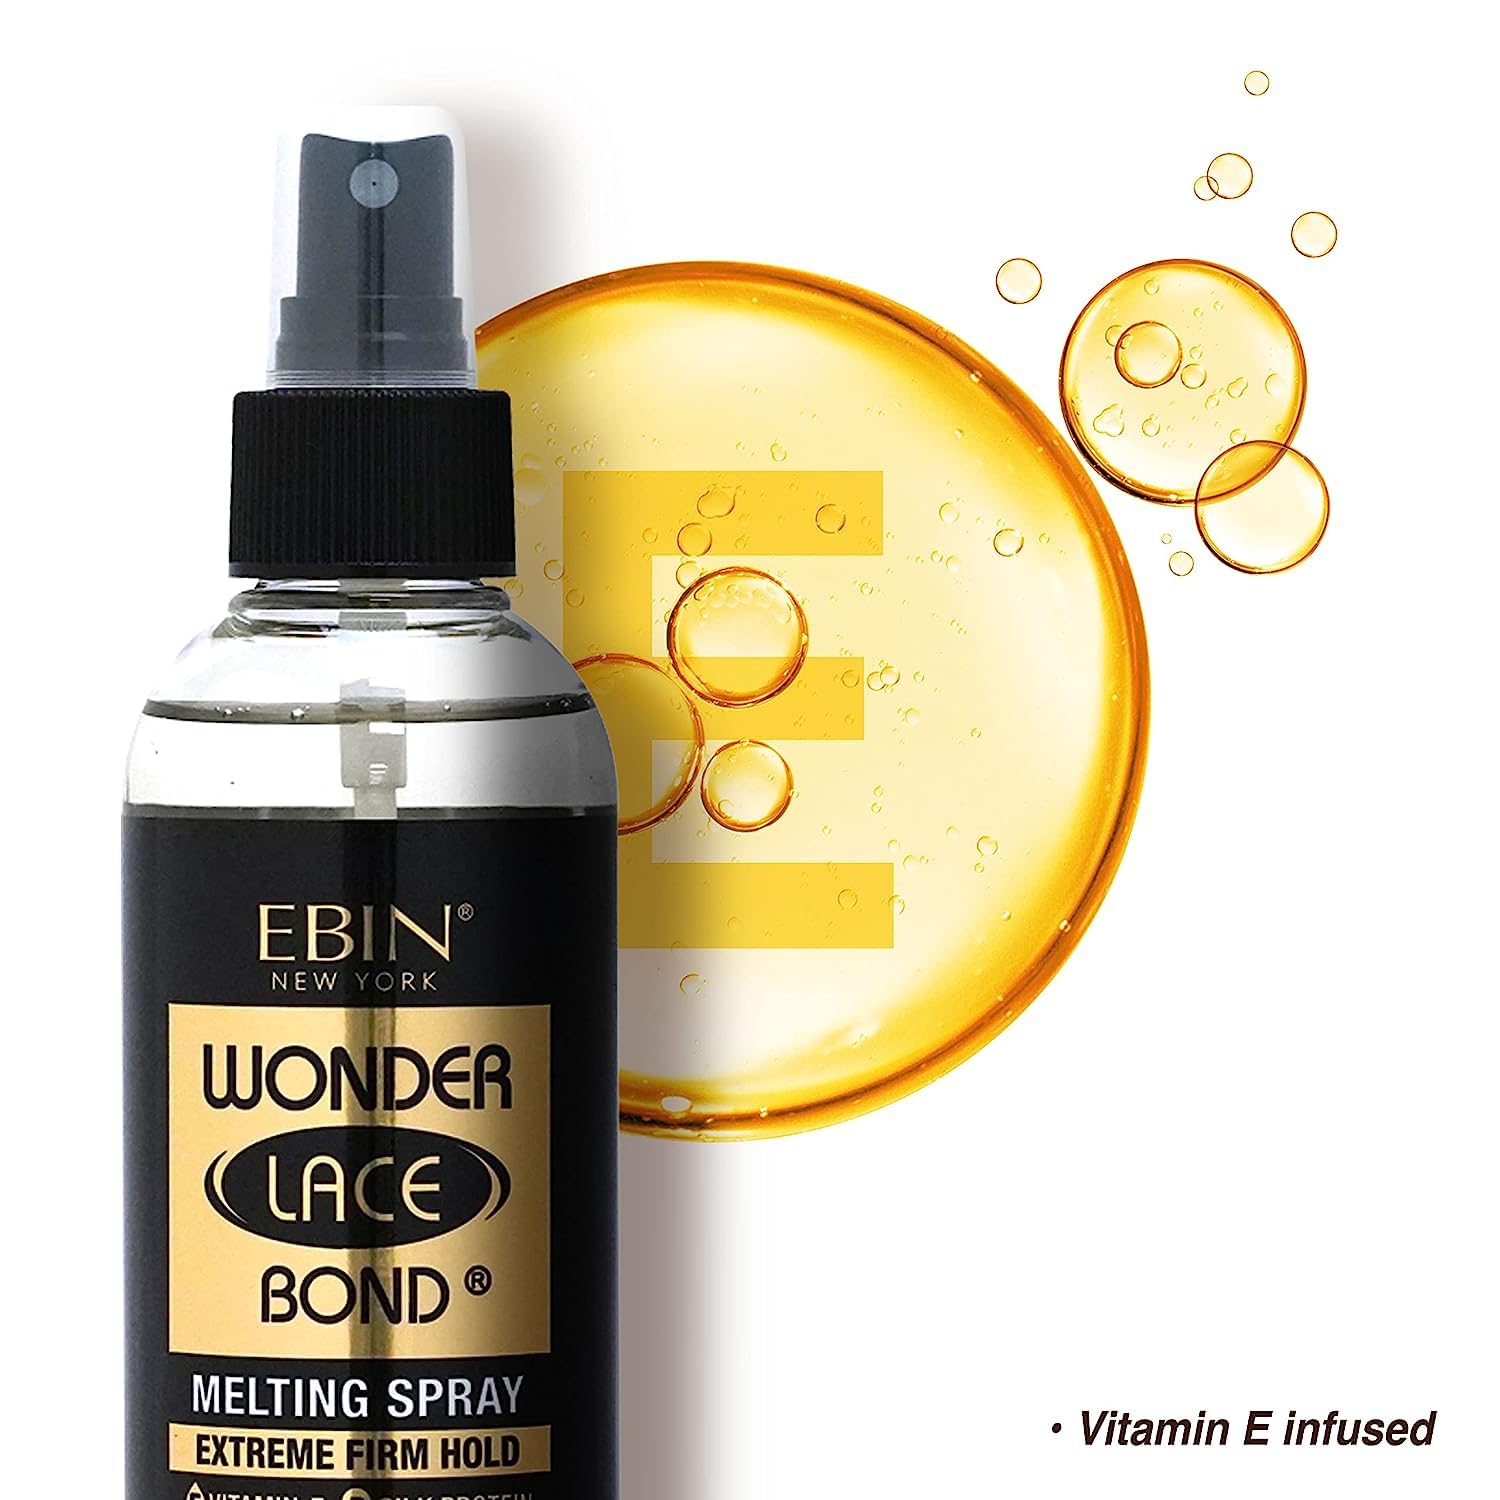 EBIN NEW YORK Wonder Lace Bond Lace Melt Spray 3.39oz / 100ml - Extreme Firm Hold (Supreme) | No Reside, Long Lasting Formula with Protecting Edges